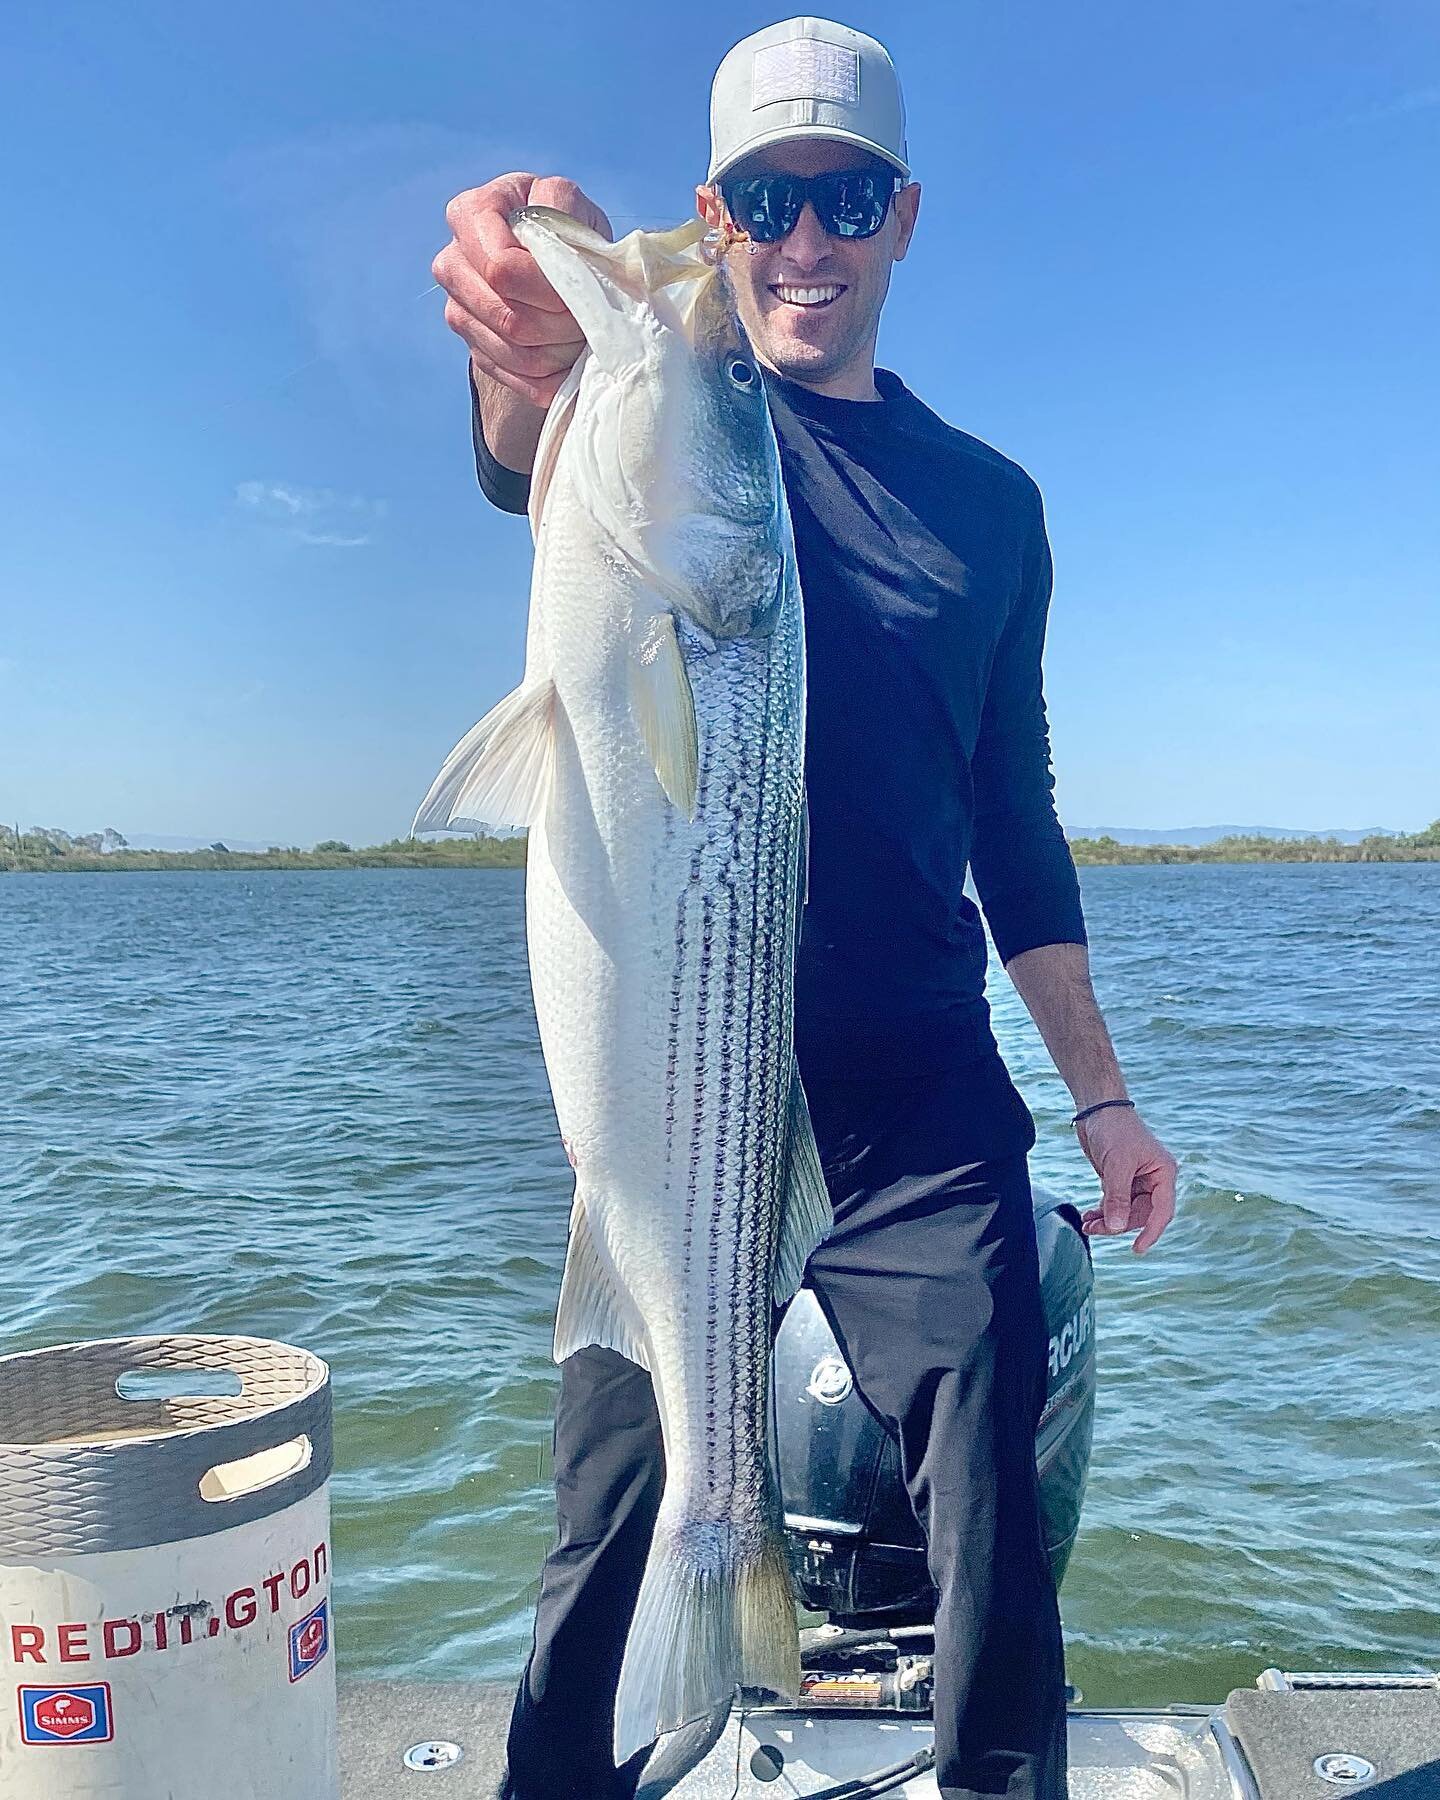 Highlight of the week, not bad for this guests first solid Striper on a fly rod! @sageflyfish @redingtongear @rioproducts @costasunglasses @simmsfishing @calbassunion @yeti